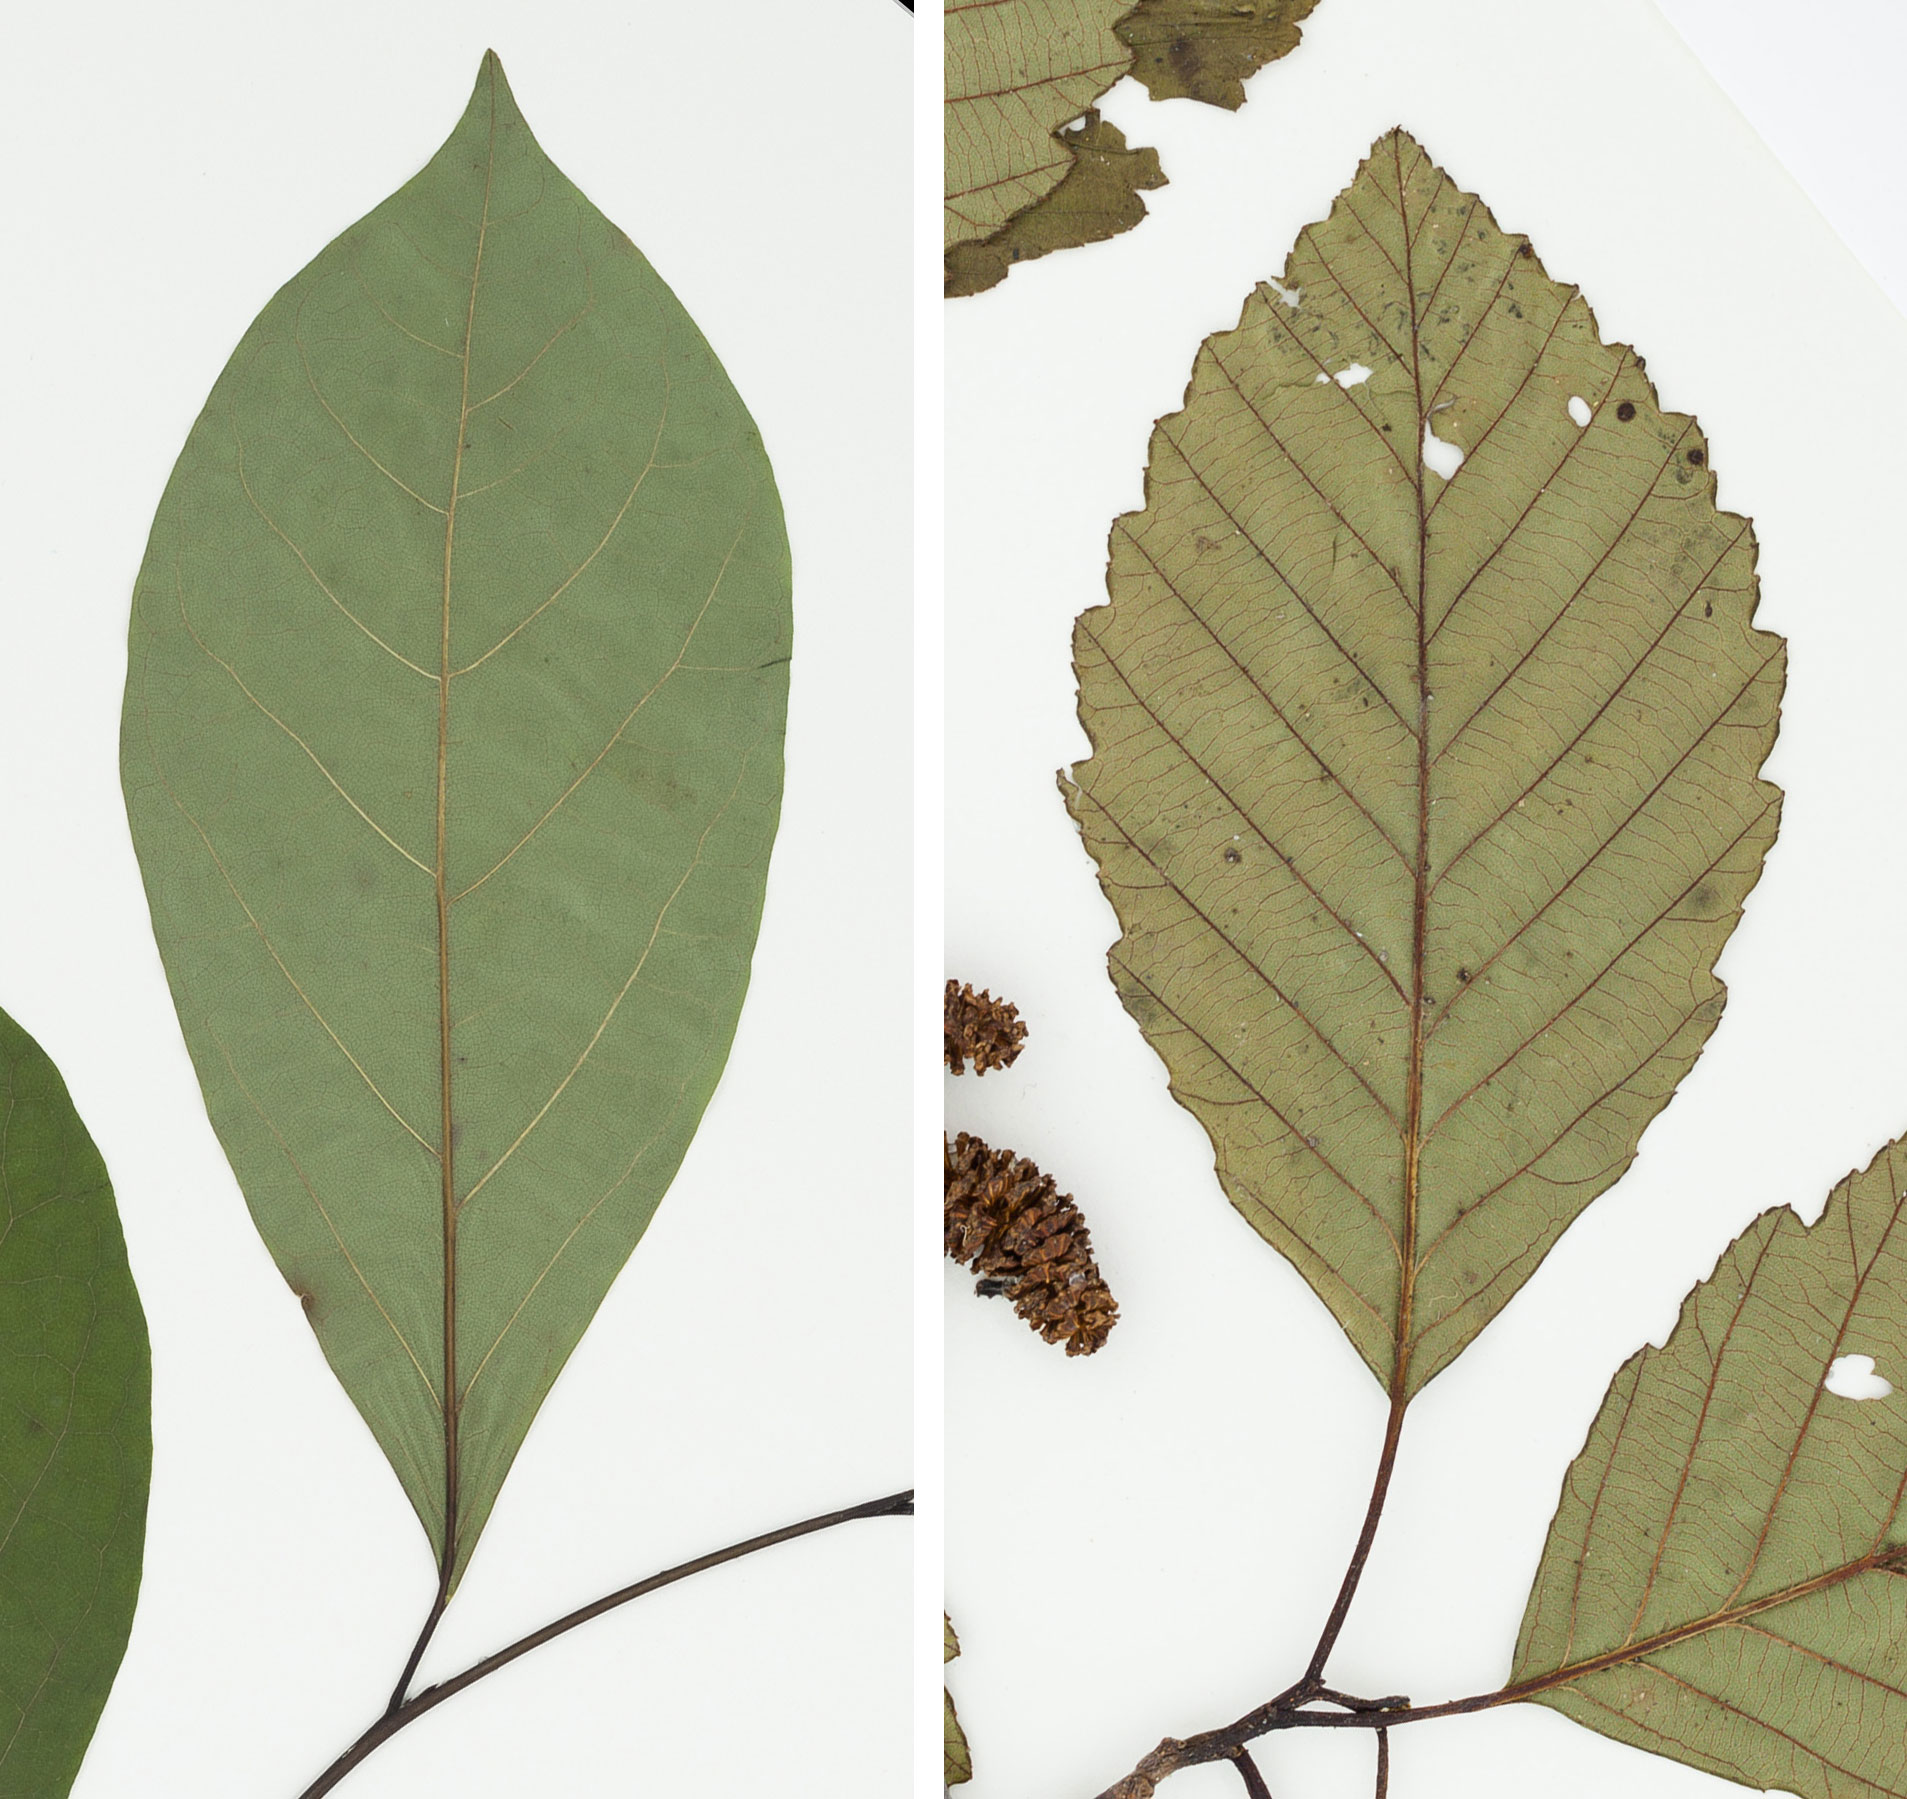 2-Panel image showing photos of simple, unlobed leaves on herbarium specimens of modern plants. Panel 1: Leaf of northern spicebush with an entire margin. Panel 2: Leaf of red alder with a toothed margin.